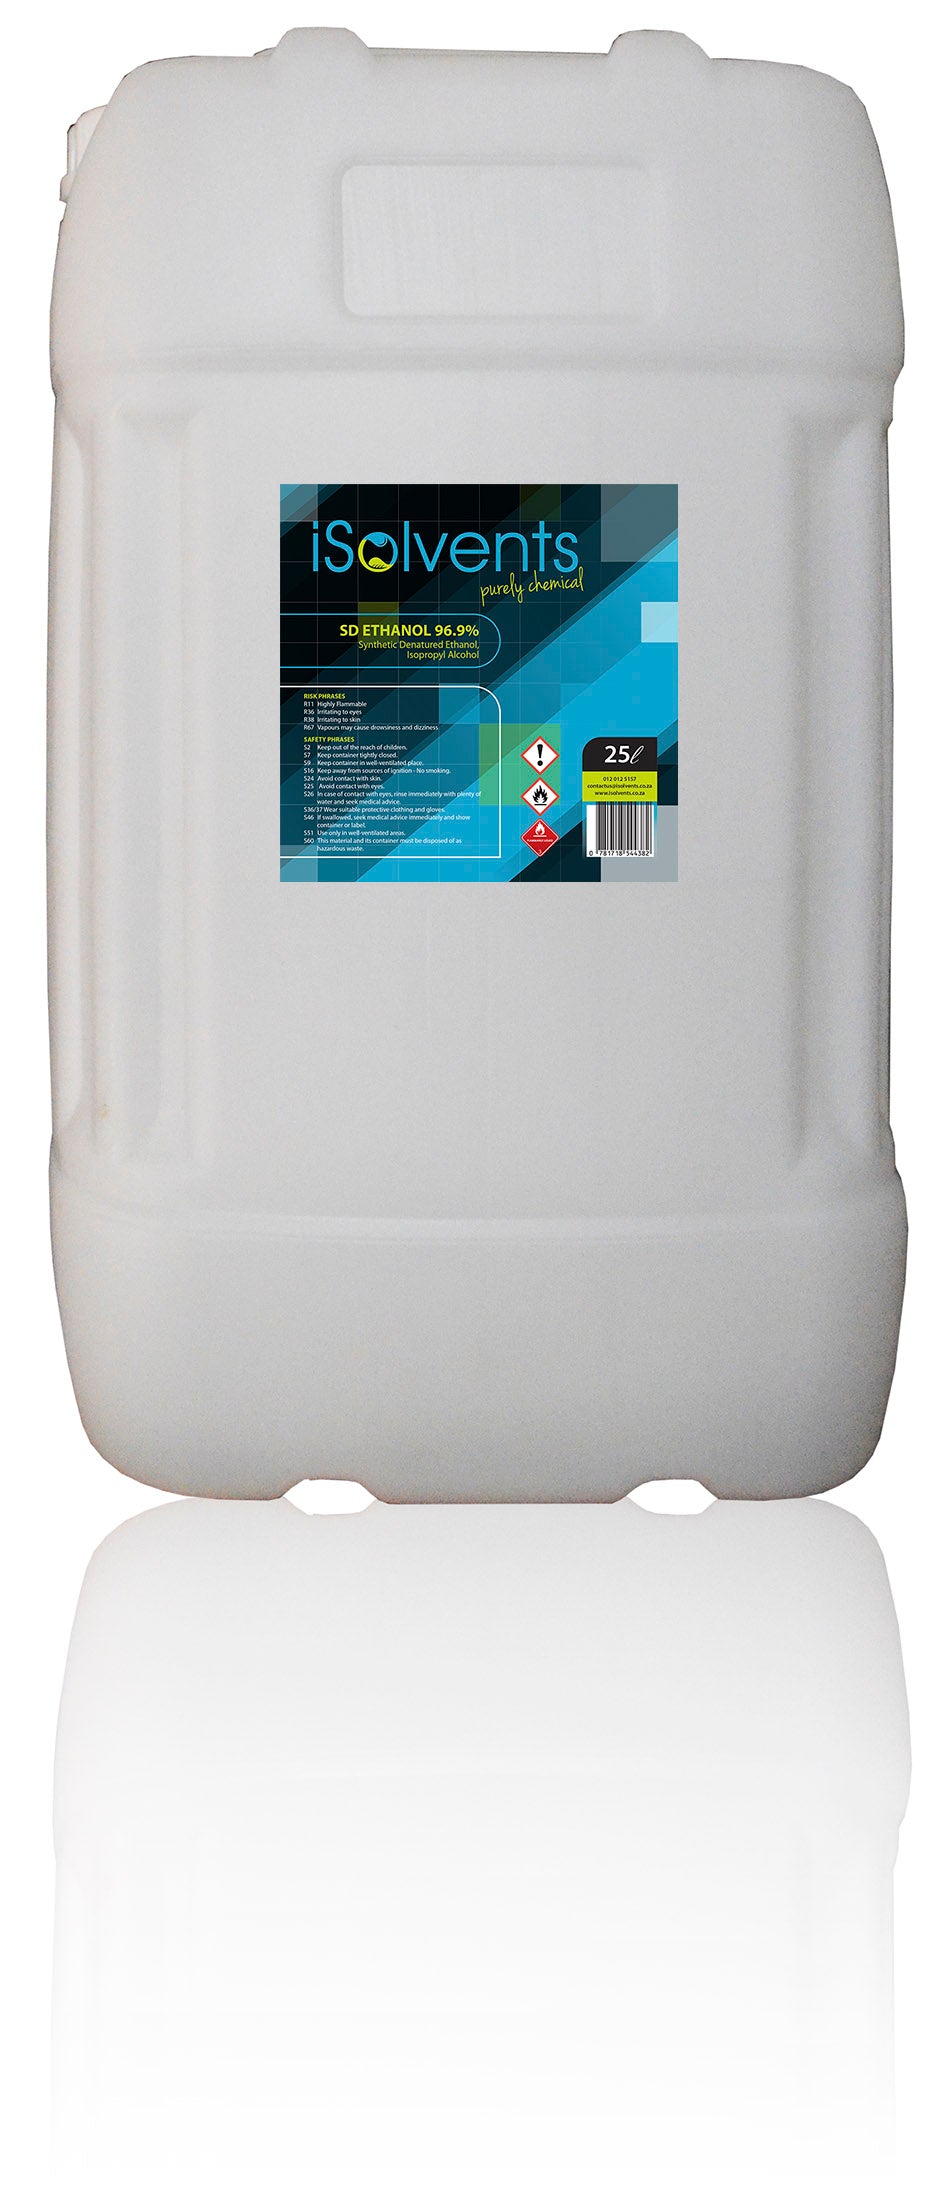 Synthetic denatured ethanol product 96.9 25l